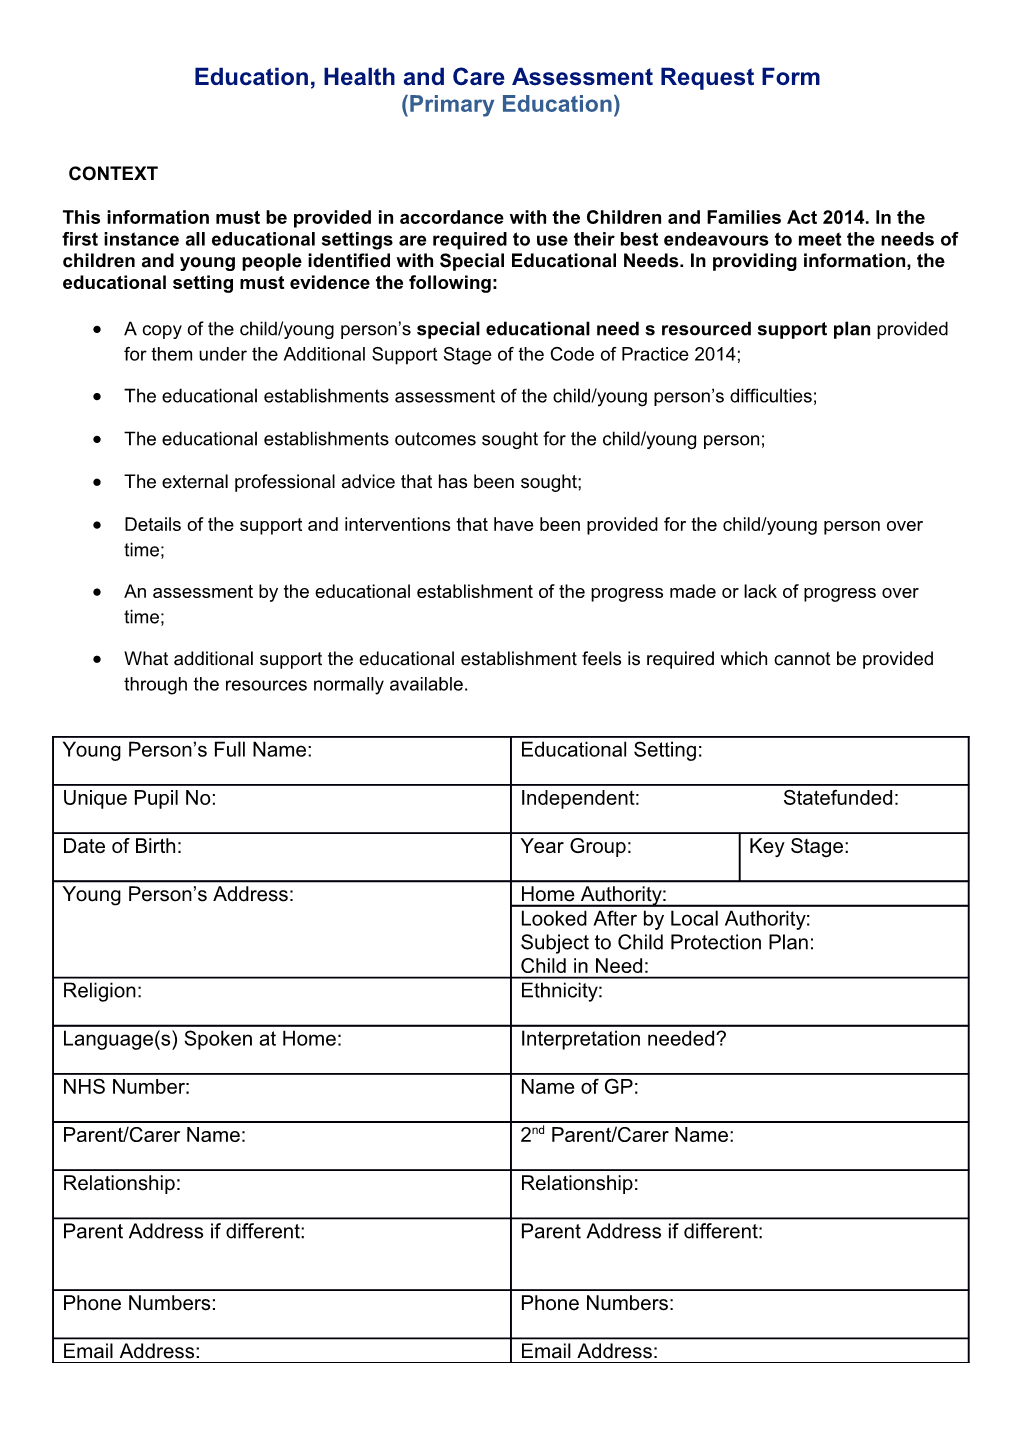 Education, Health and Care Assessment Request Form